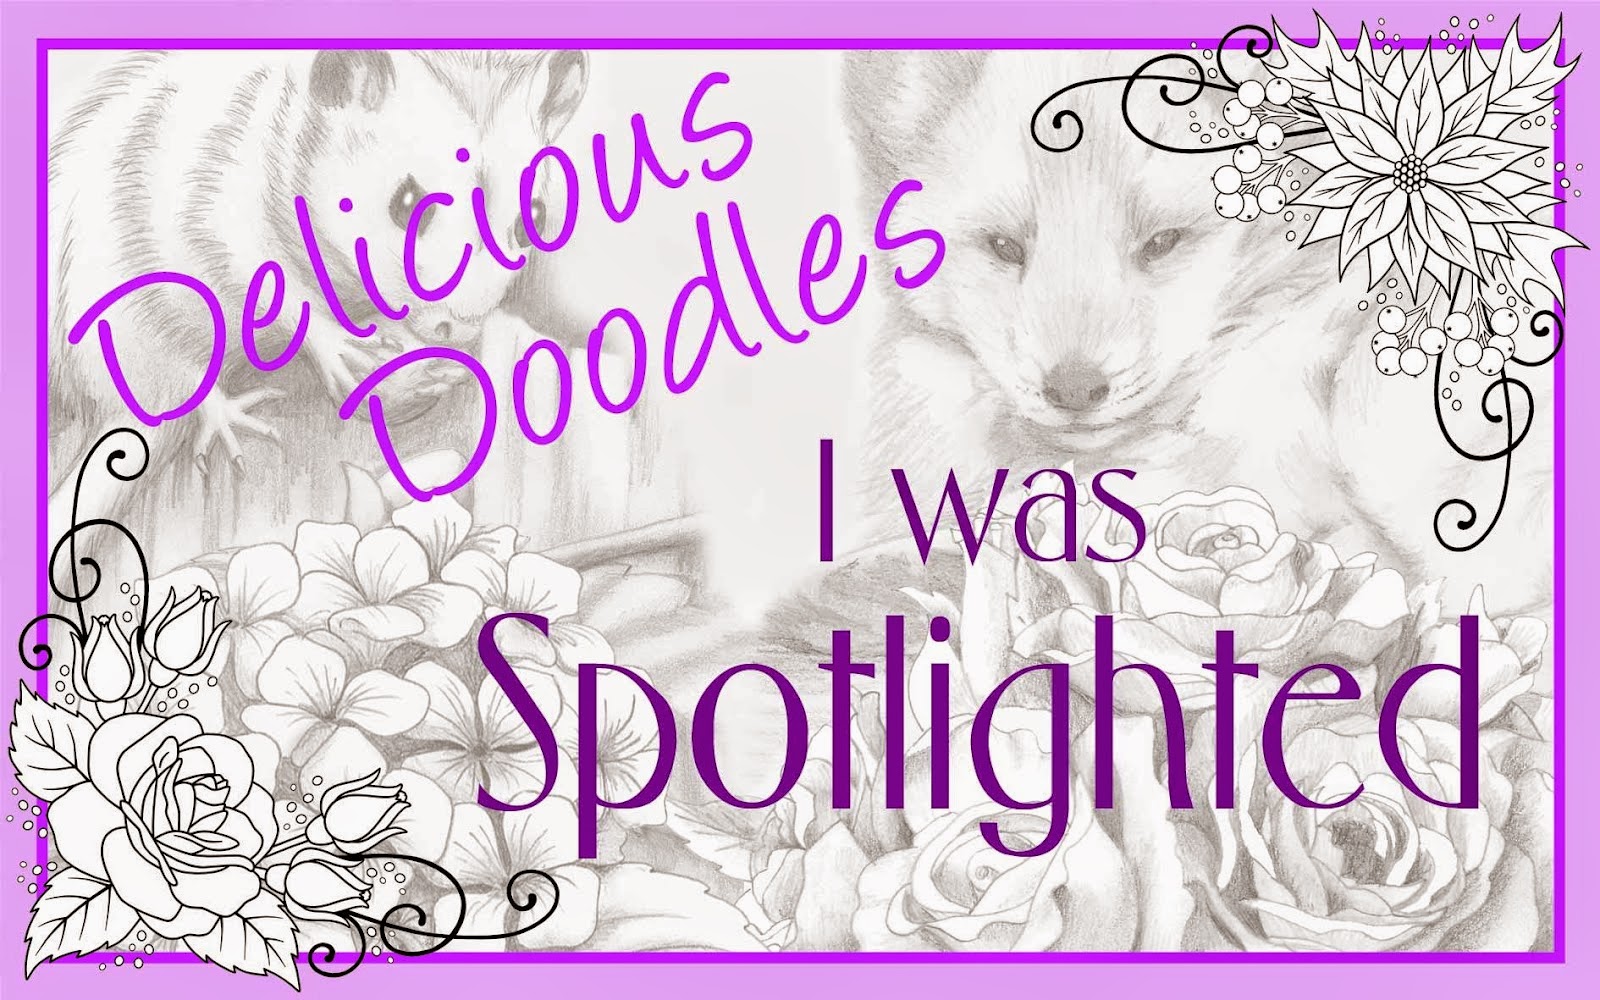 Spotlighted at Delicious Doodles!